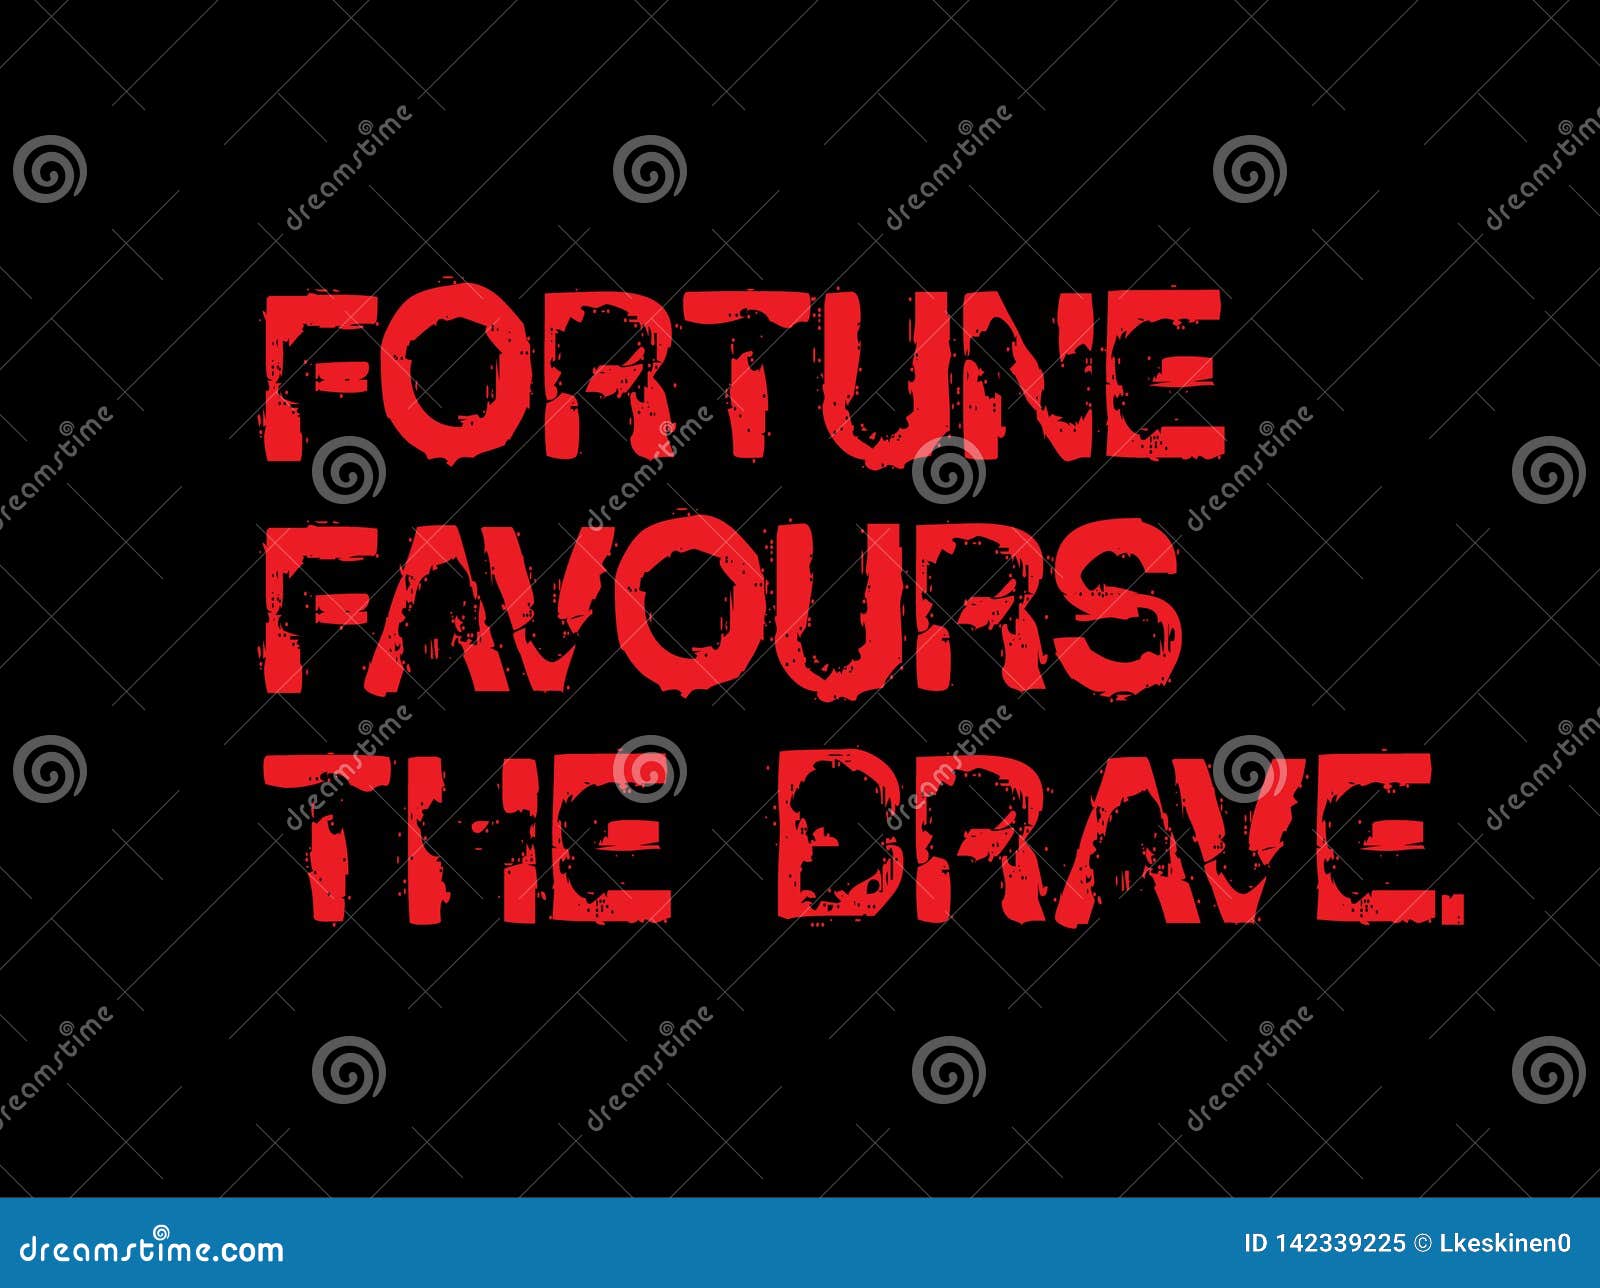 fortune the brave meaning